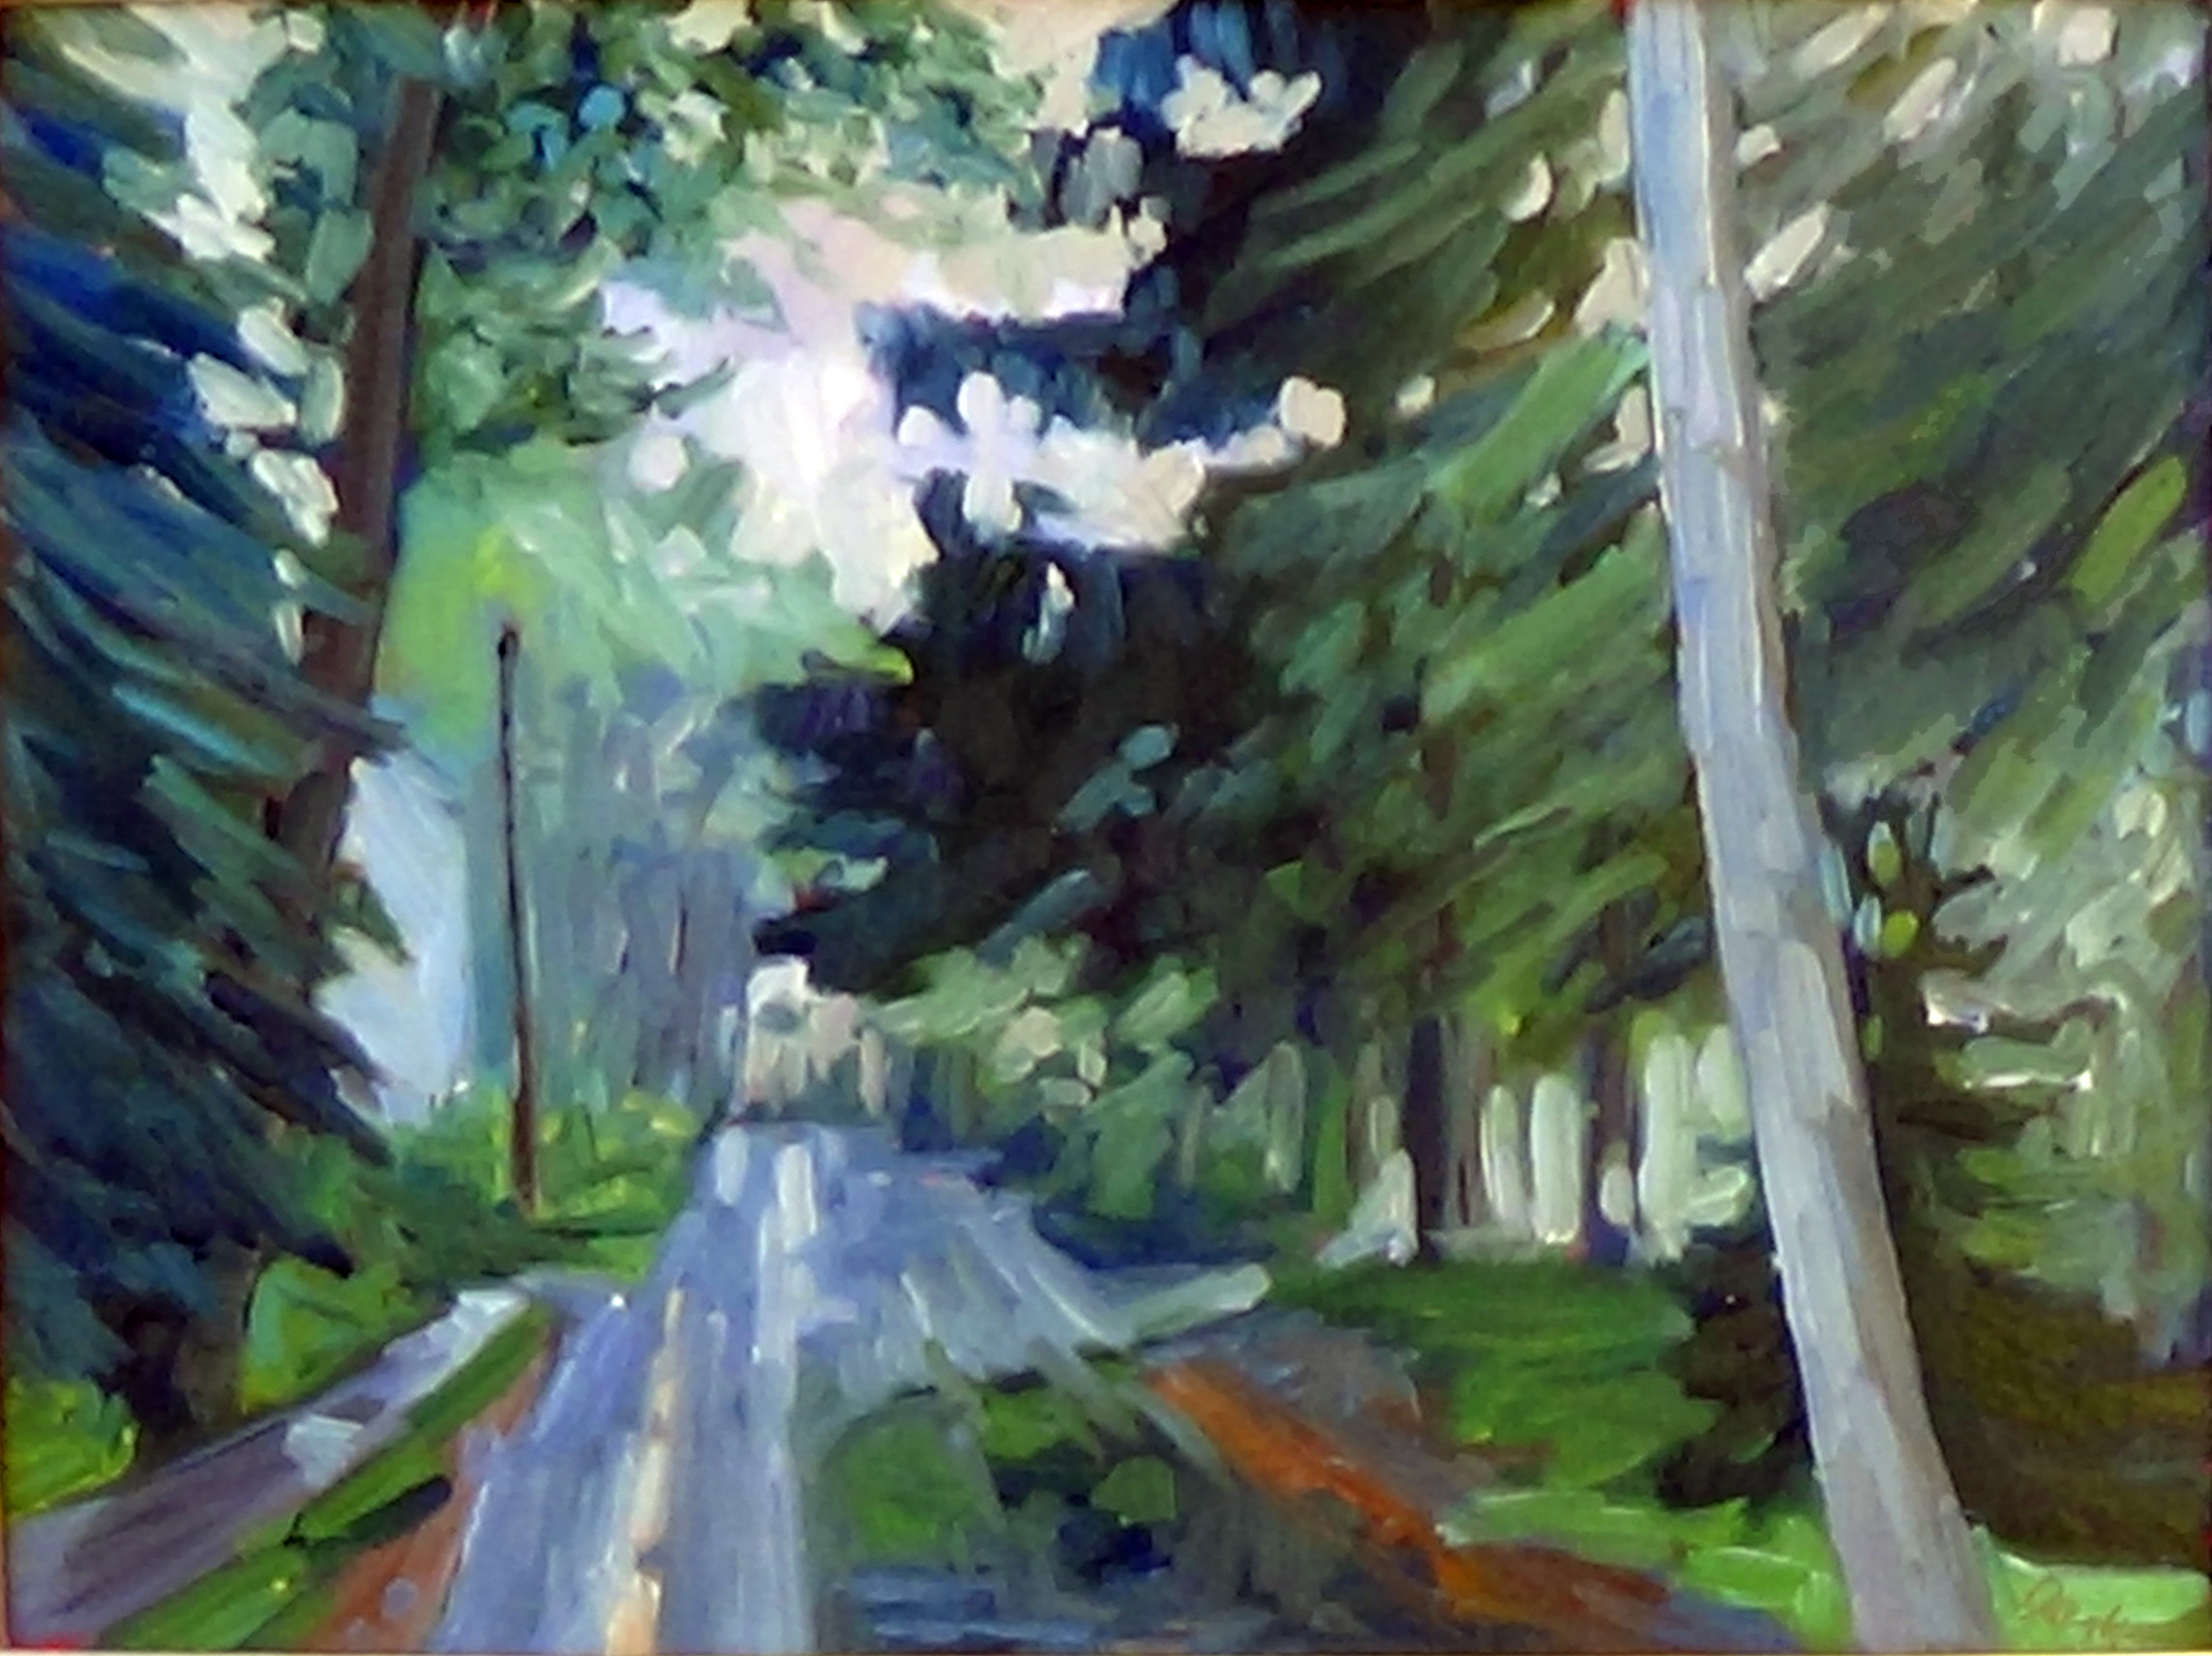 "Sometimes It Rains," oil on canvasboard, private collection.